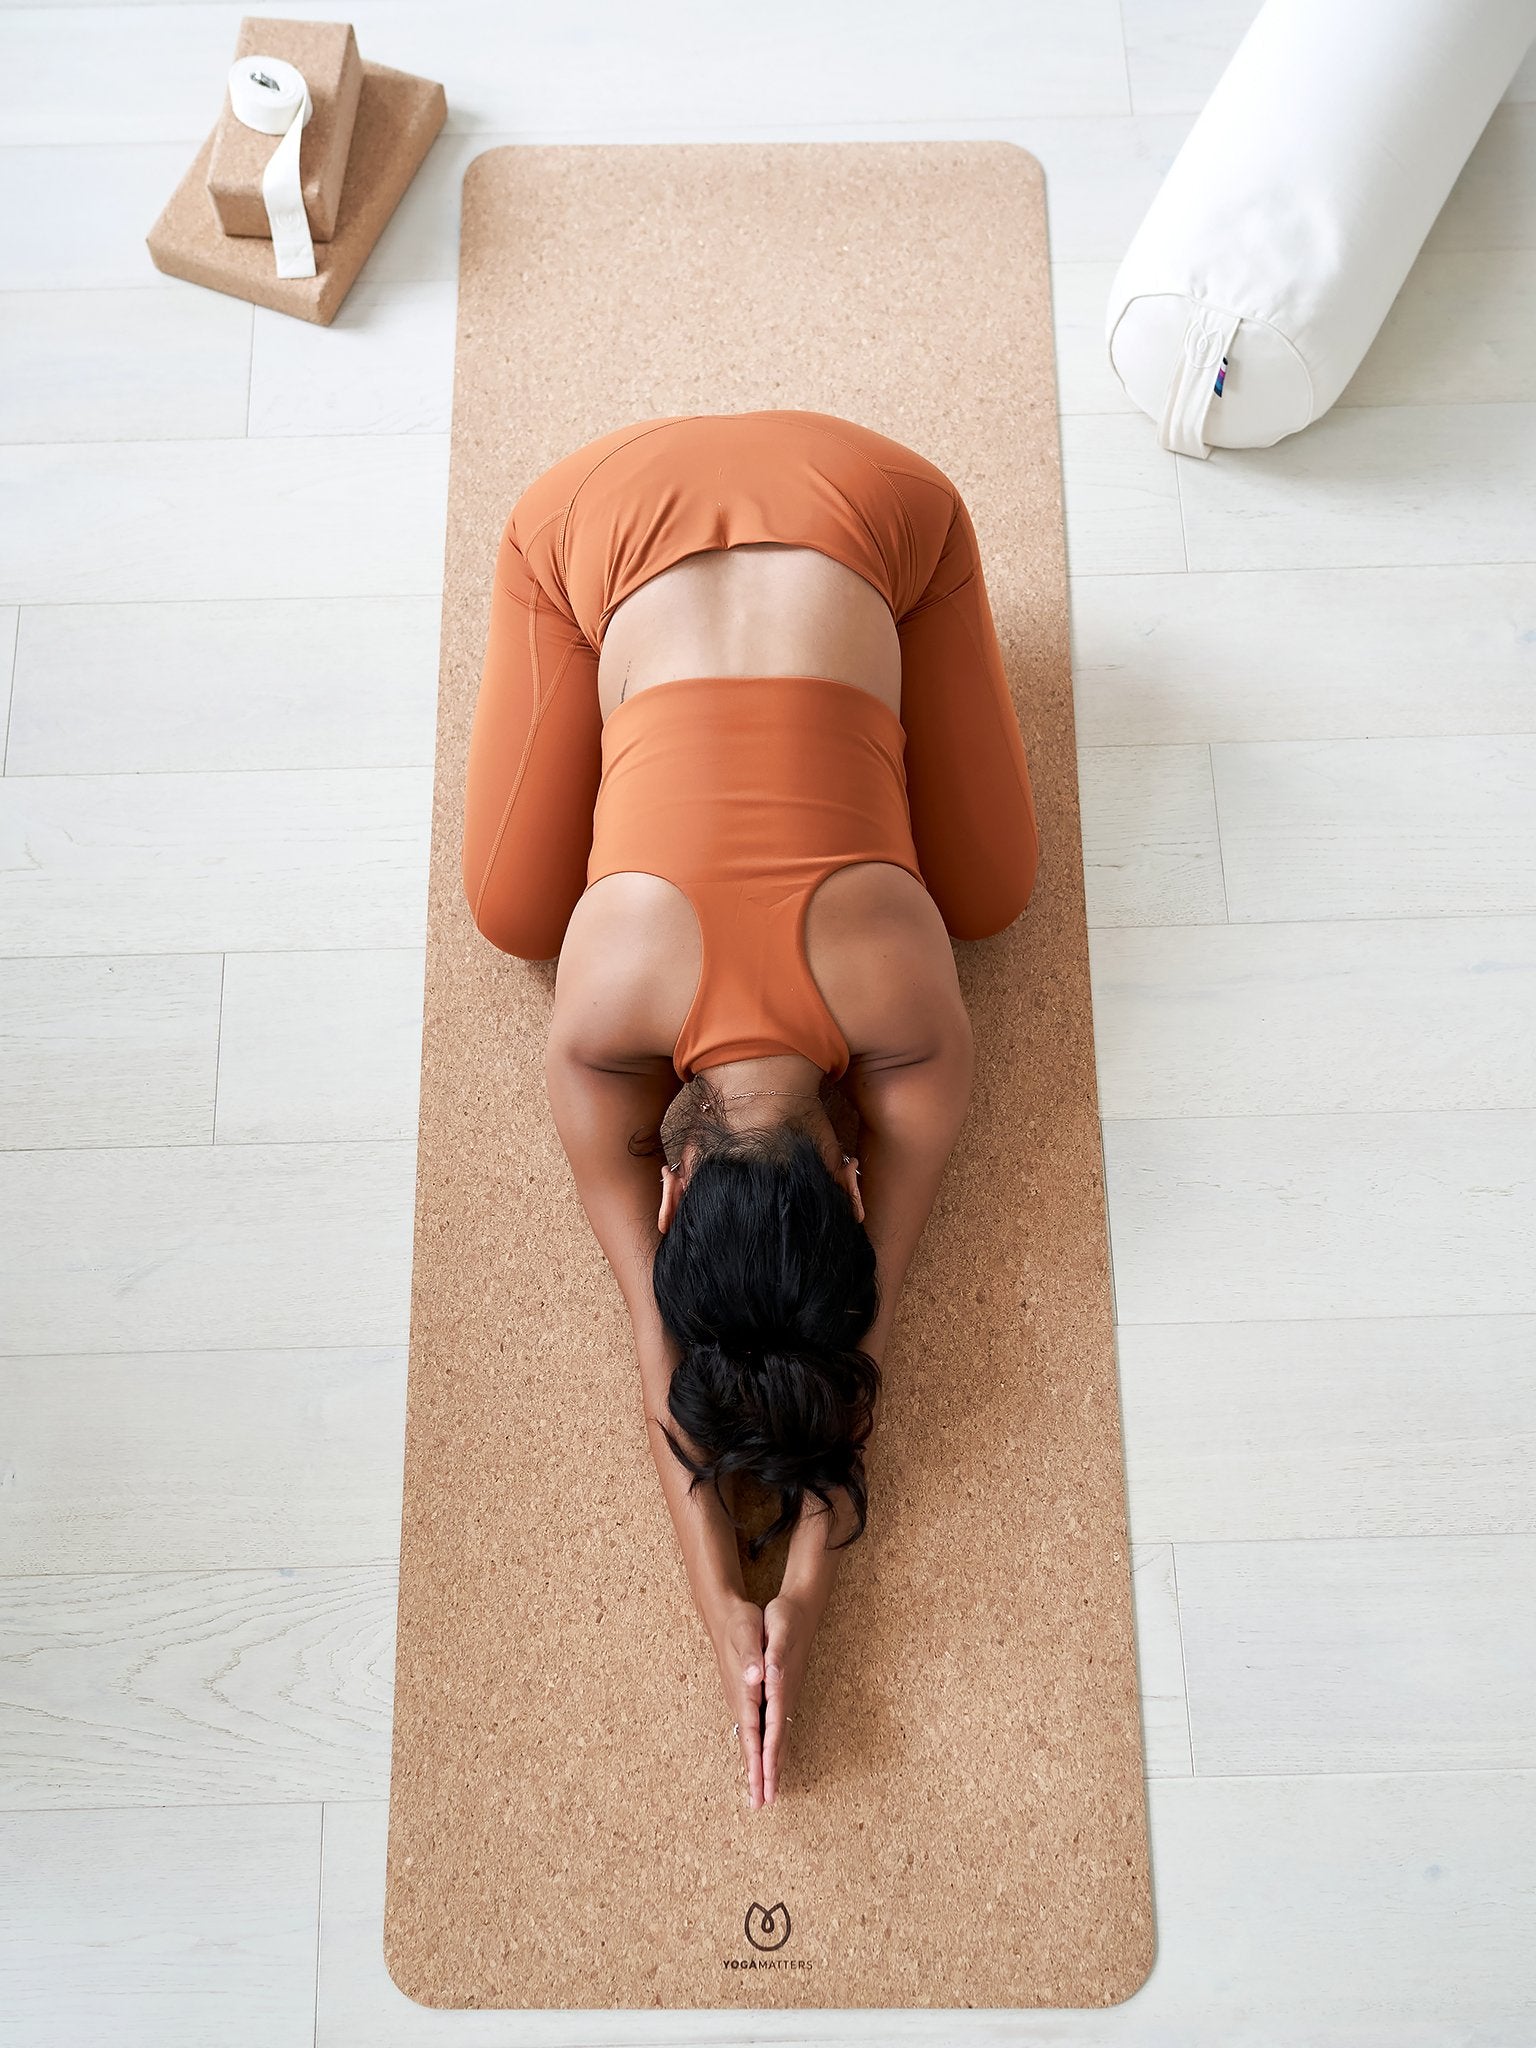 Woman practicing Child's Pose on a cork yoga mat by YOGA MATTERS, beige color, top-down view with yoga blocks and bolster, eco-friendly yoga gear, wellness and fitness concept.